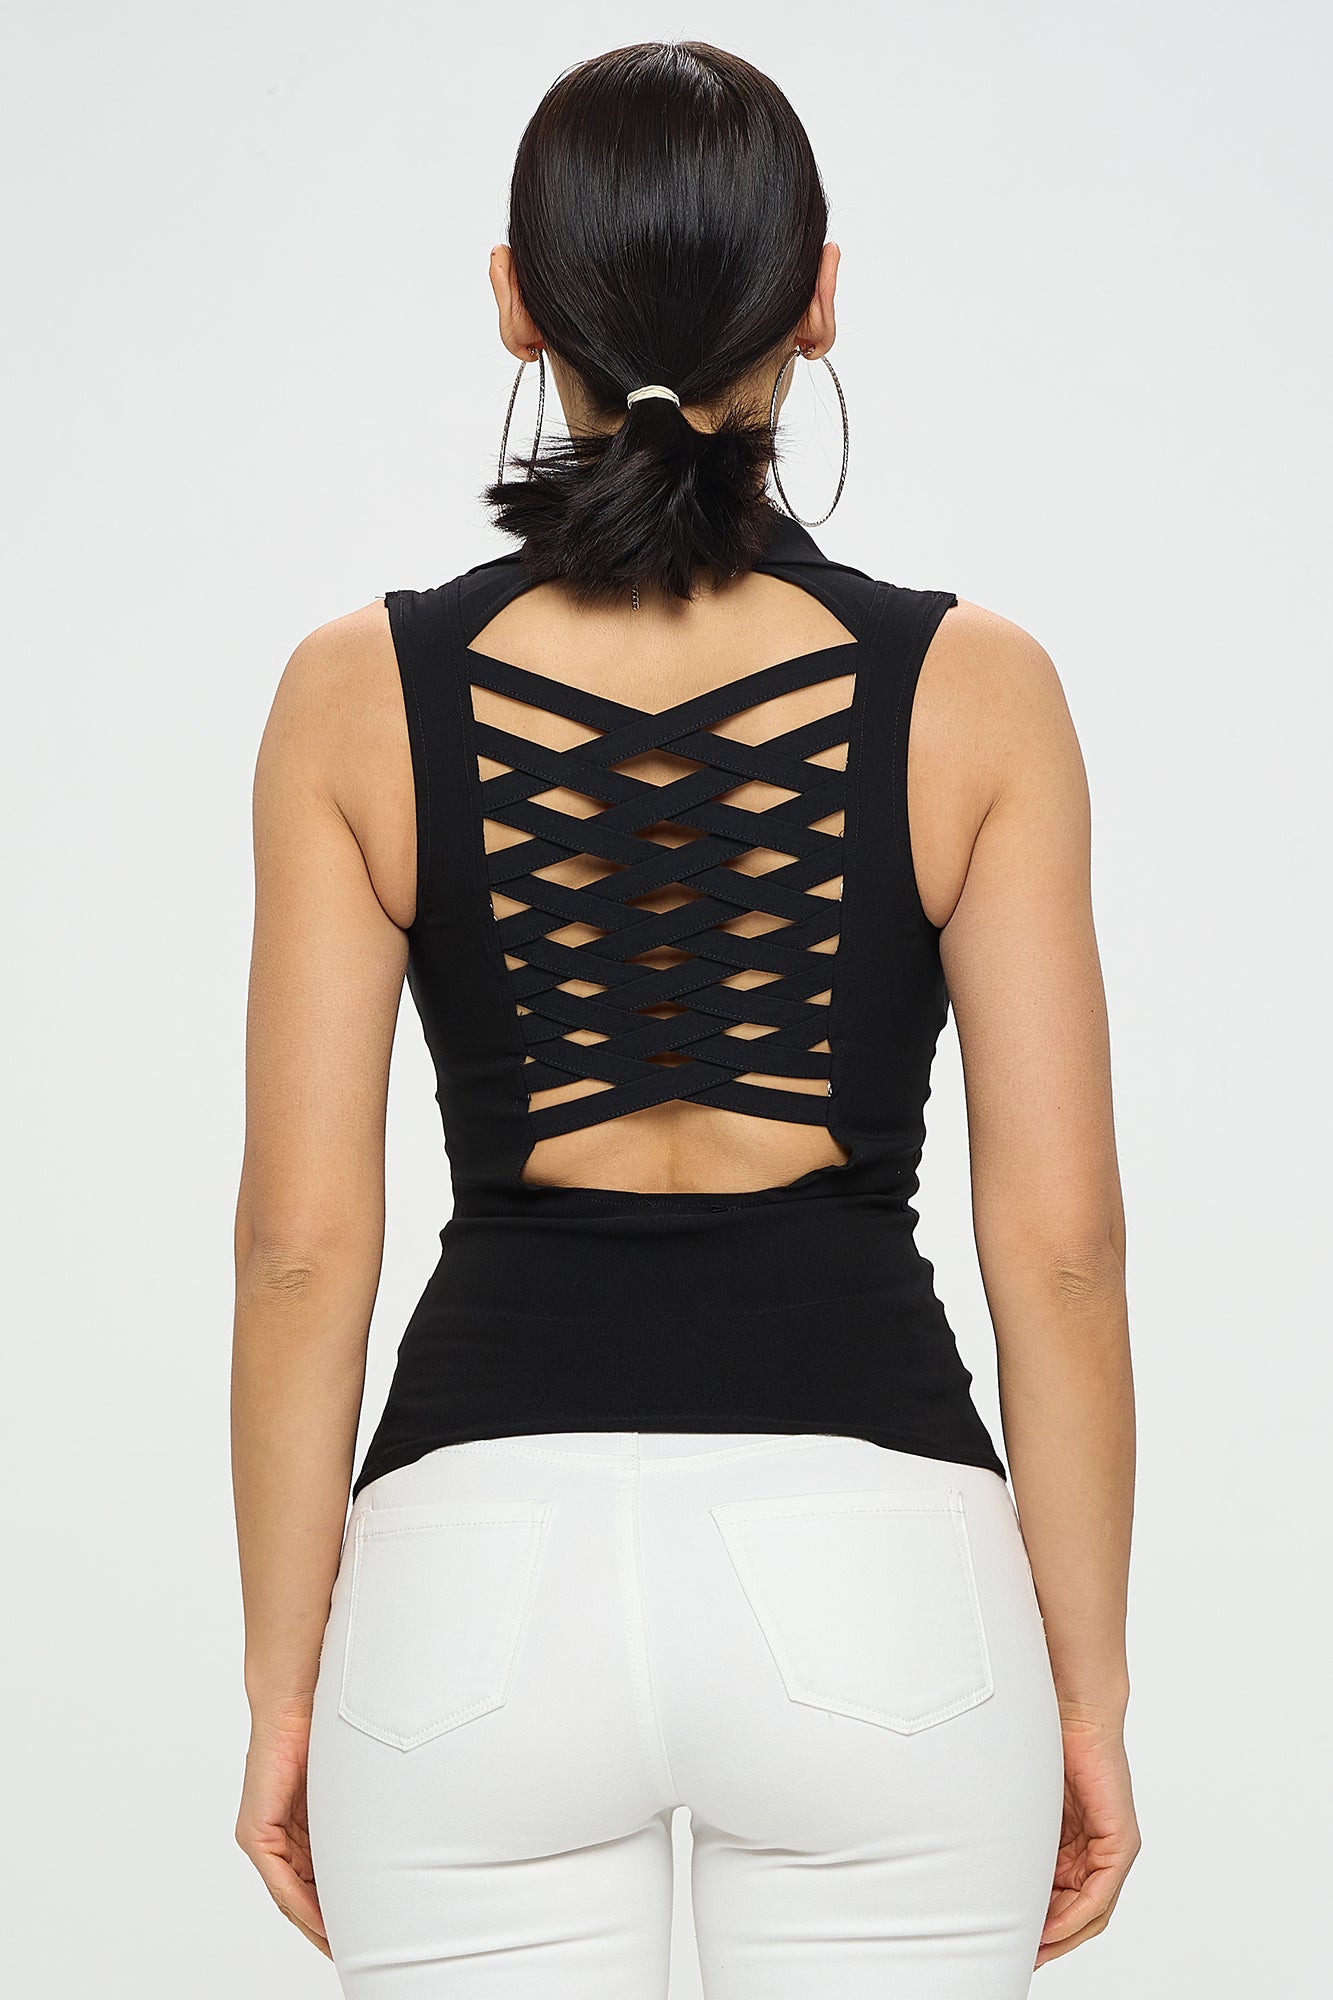 LACE UP COLLAR BACK CUT OUT DETAIL HALTER TOP